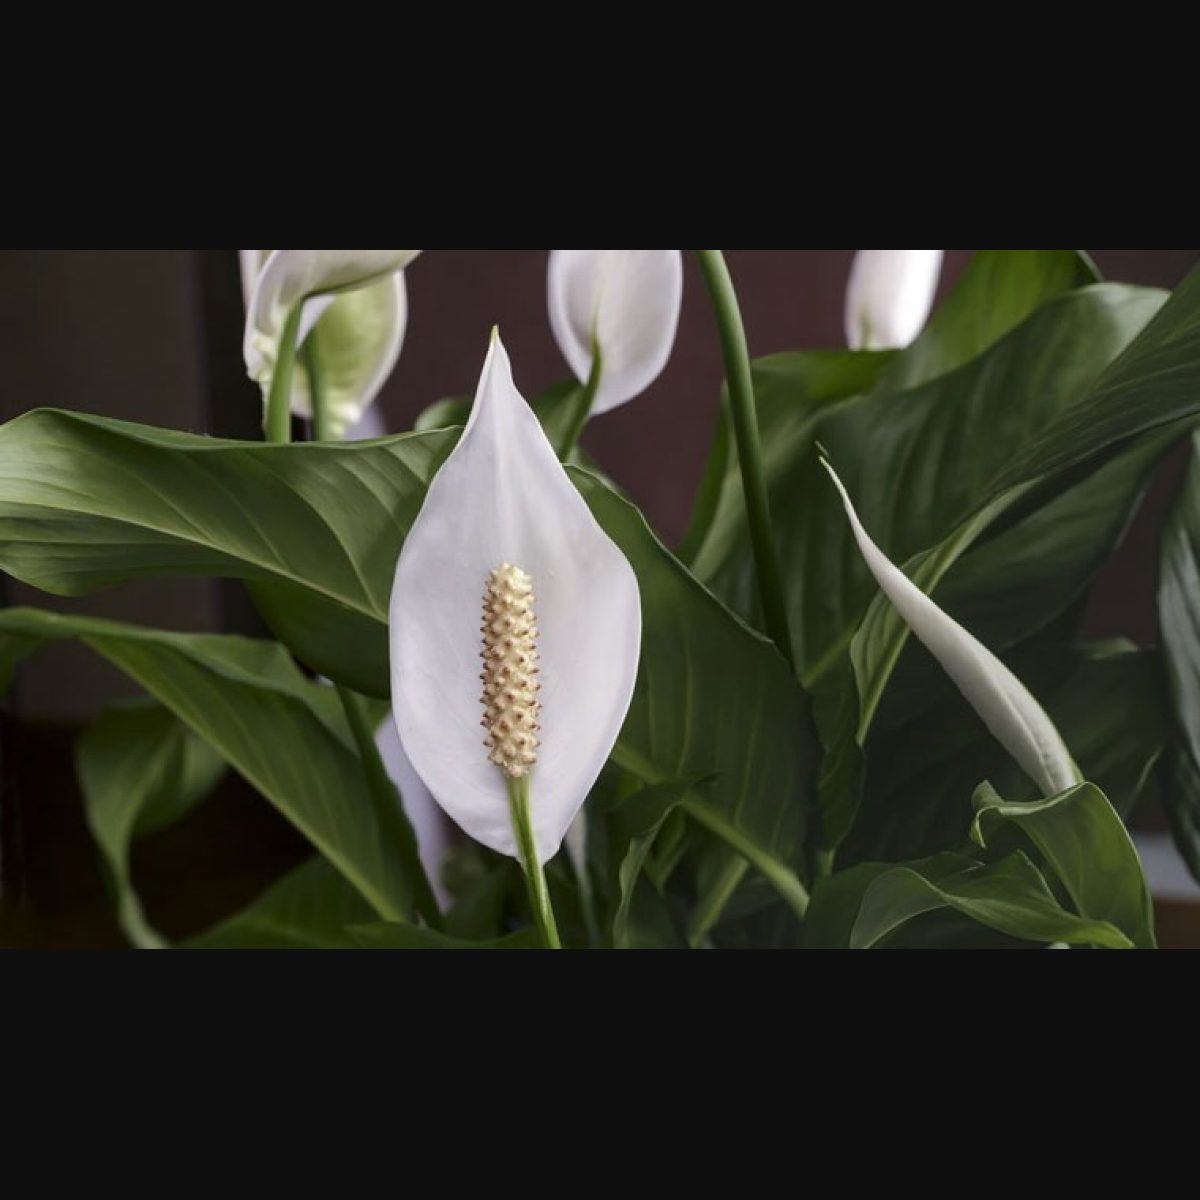 7 reasons you need a peace lily plant in your home - The Week